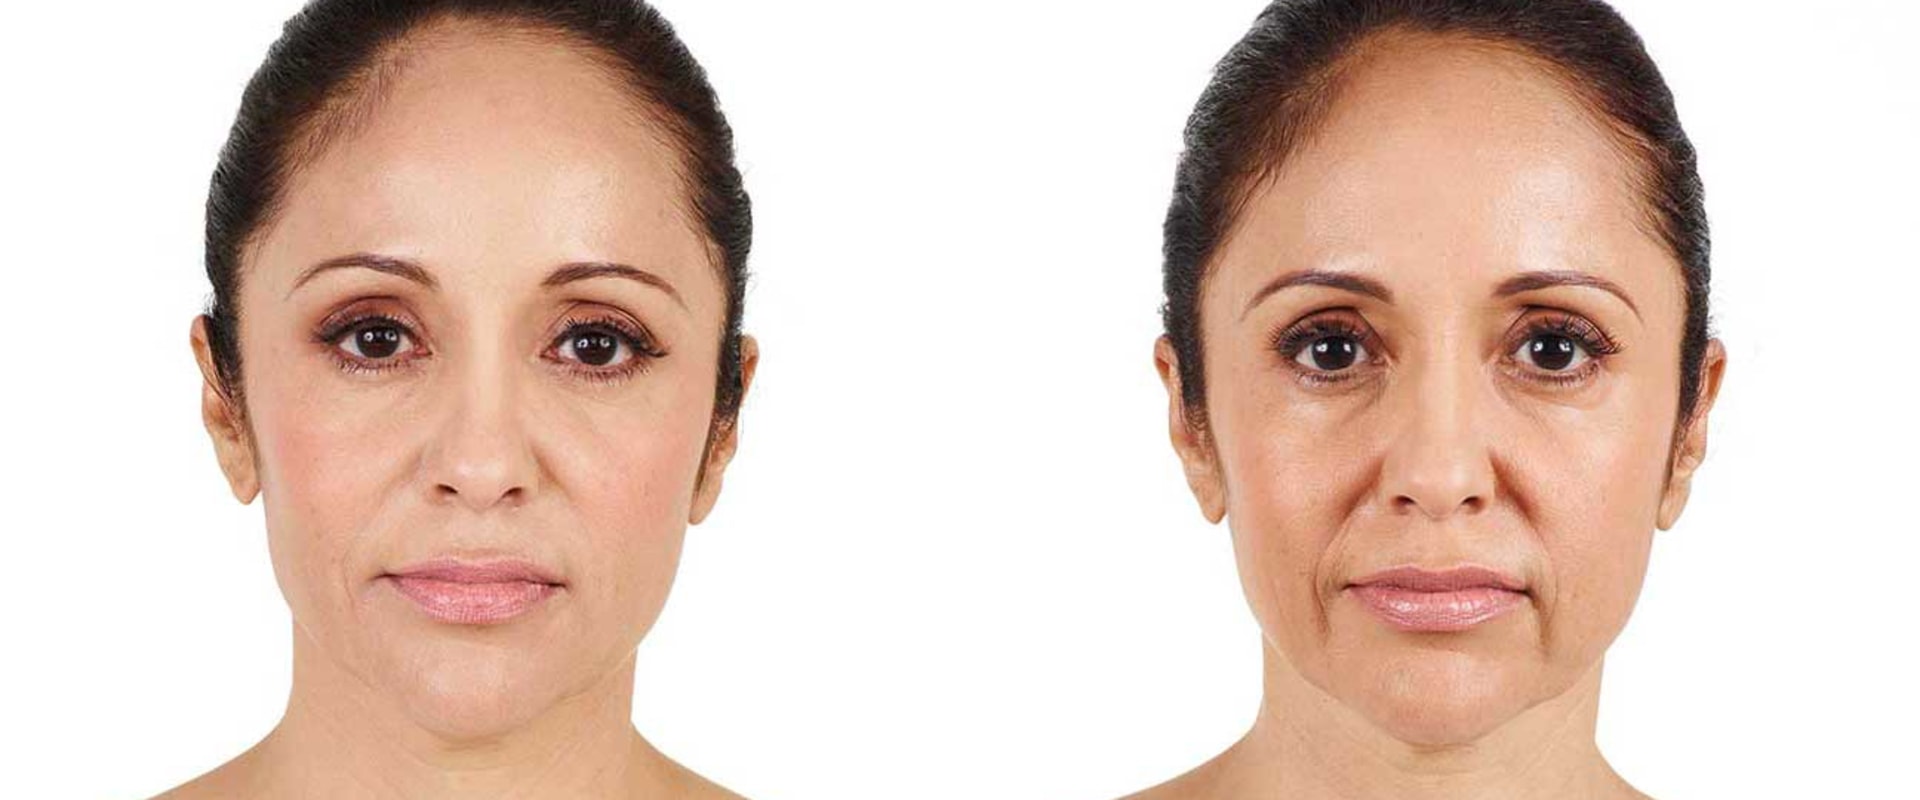 Can Juvederm Help Restore Your Facial Appearance?